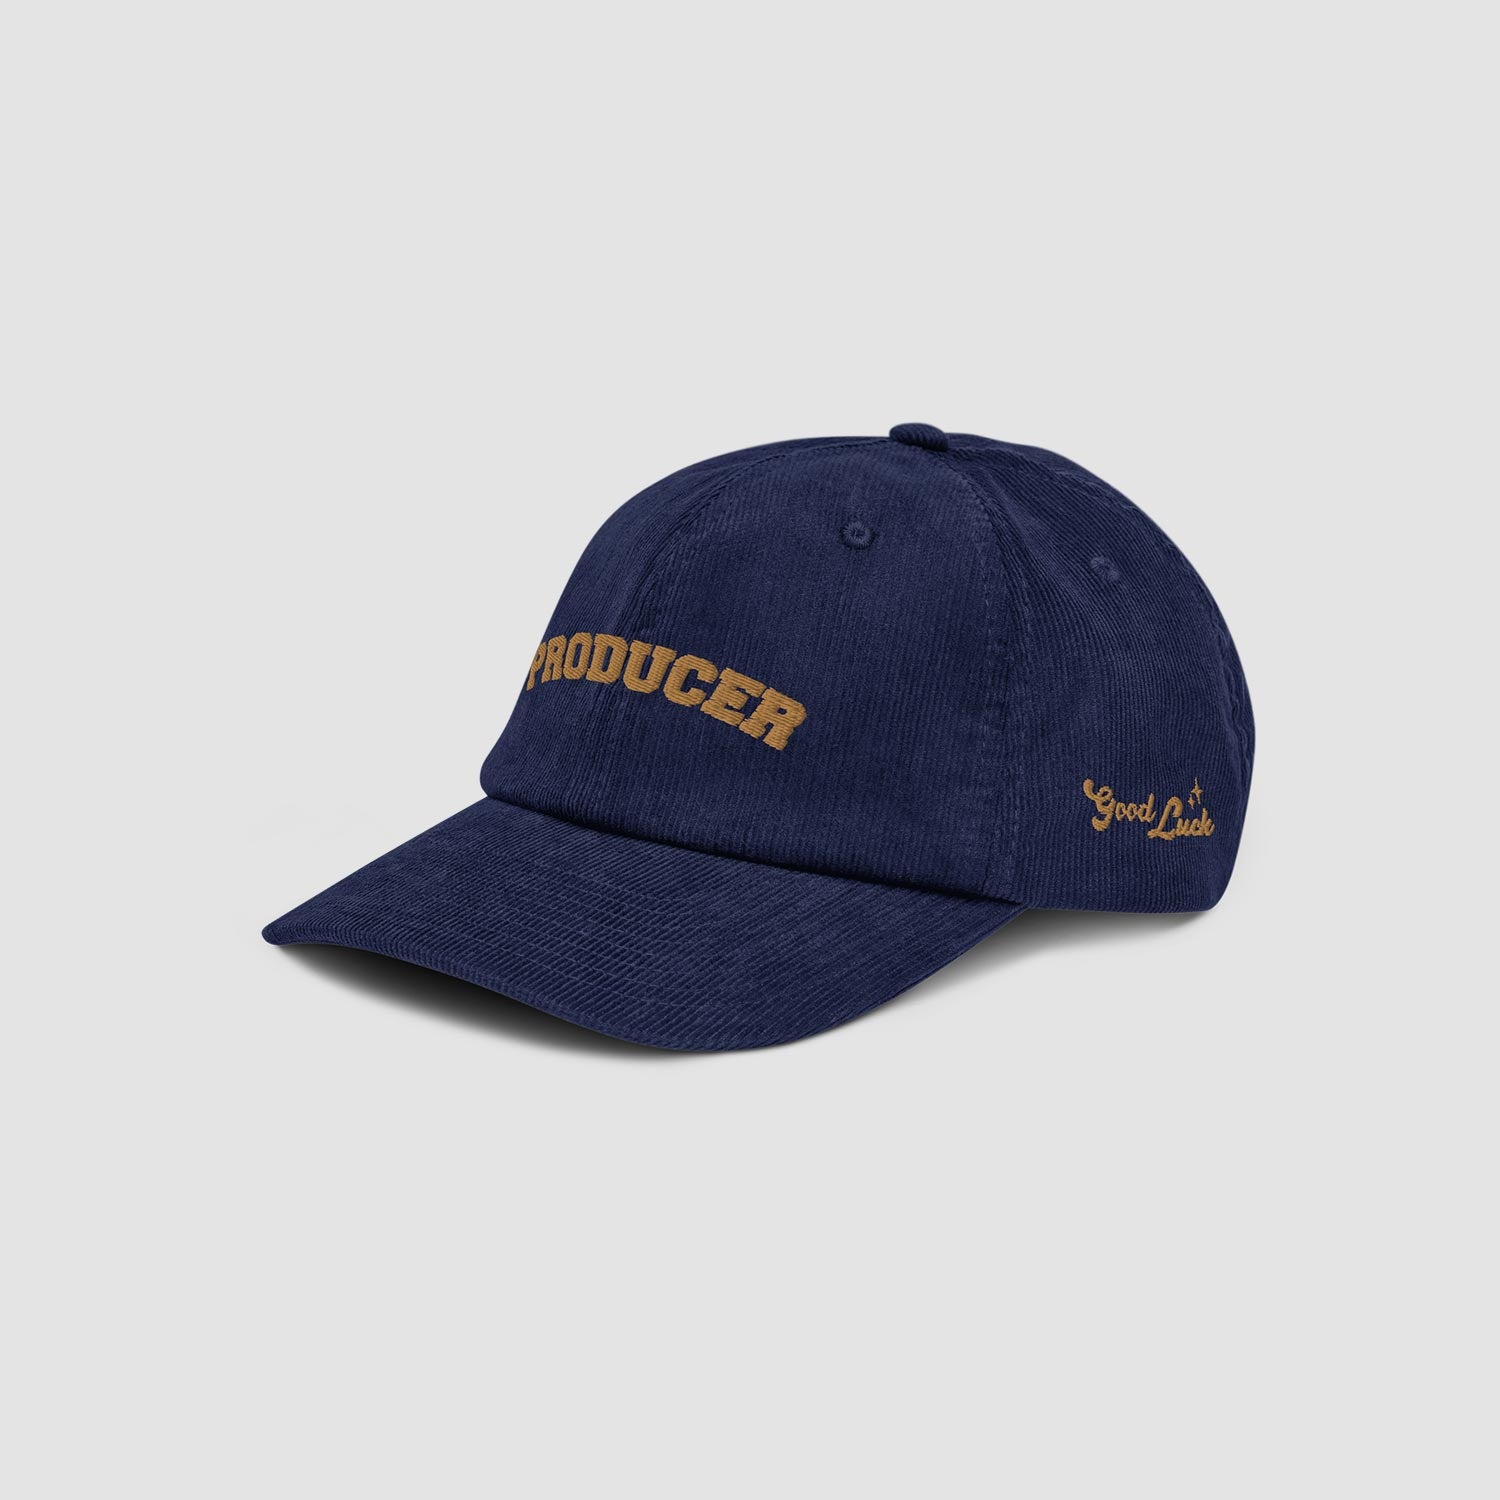 Producer Essential Hat